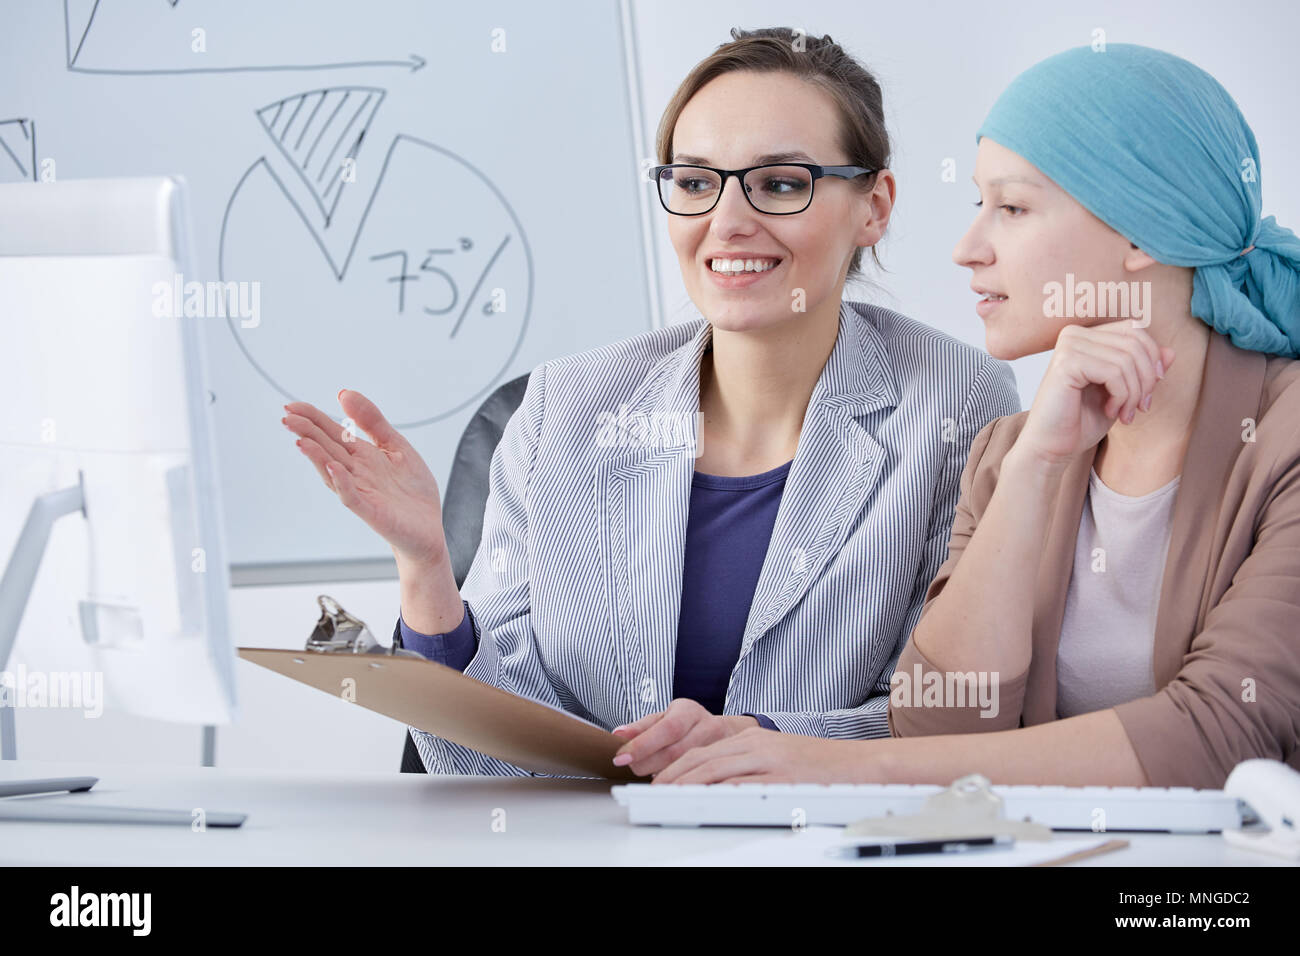 Cancer woman working at office, talking with her workmate Stock Photo